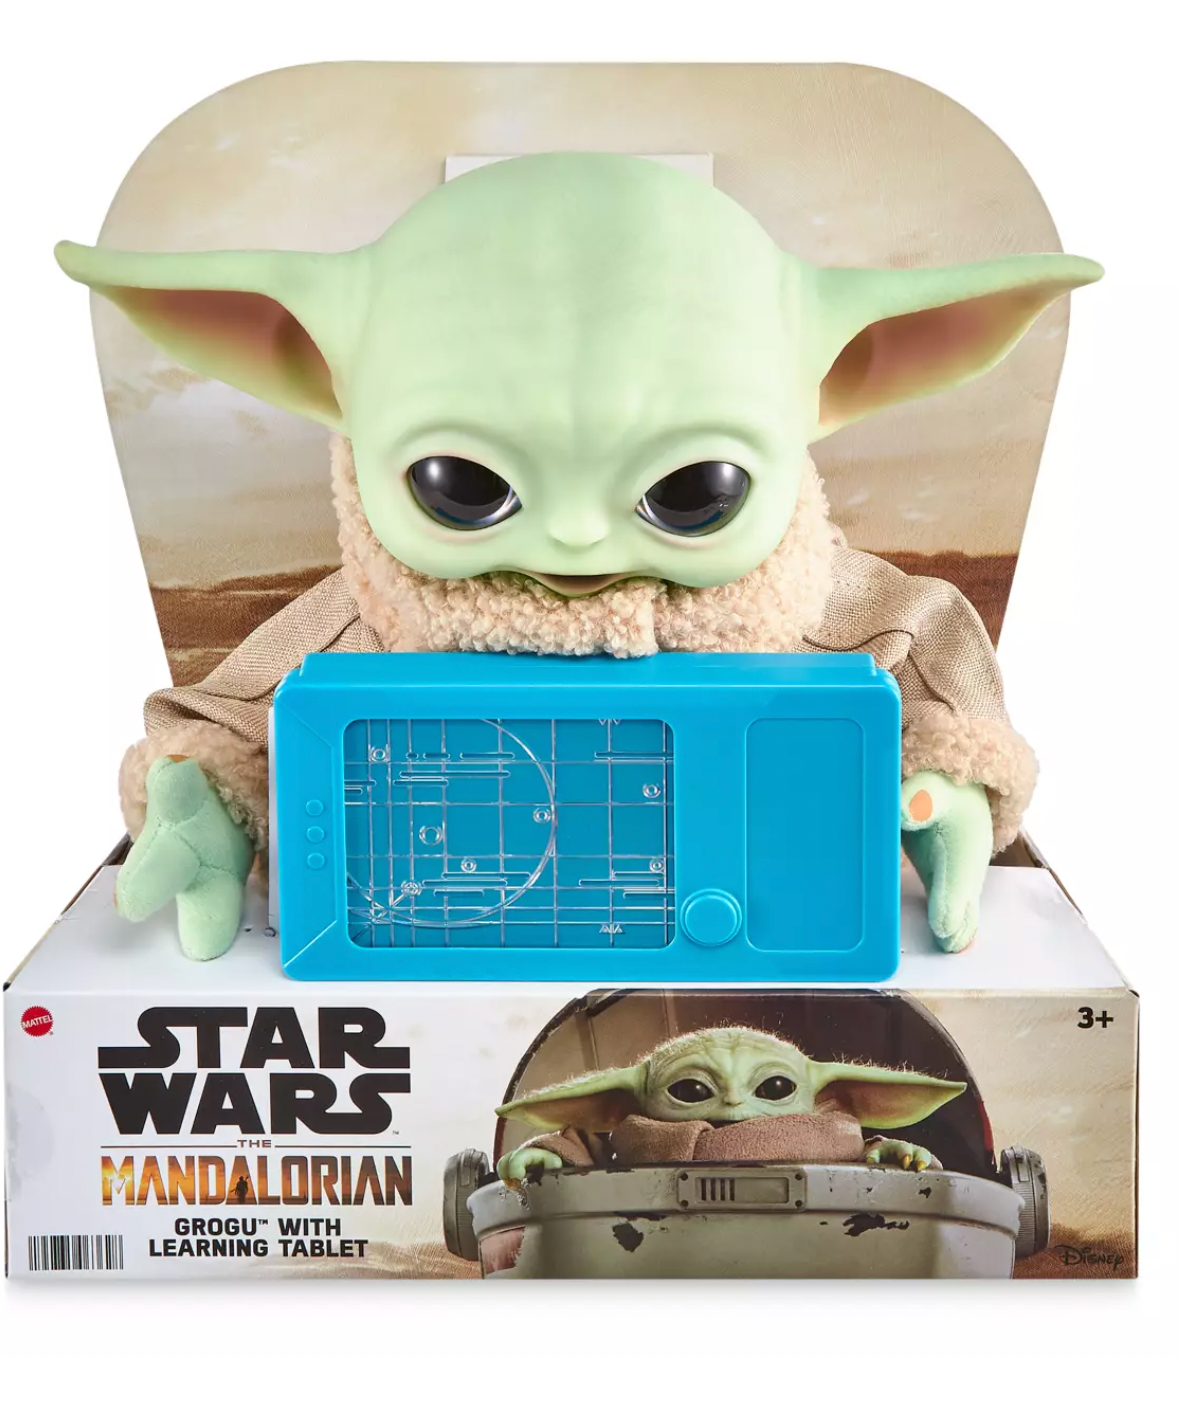 Disney Star Wars The Mandalorian Grogu with Learning Tablet Plush by Mattel New